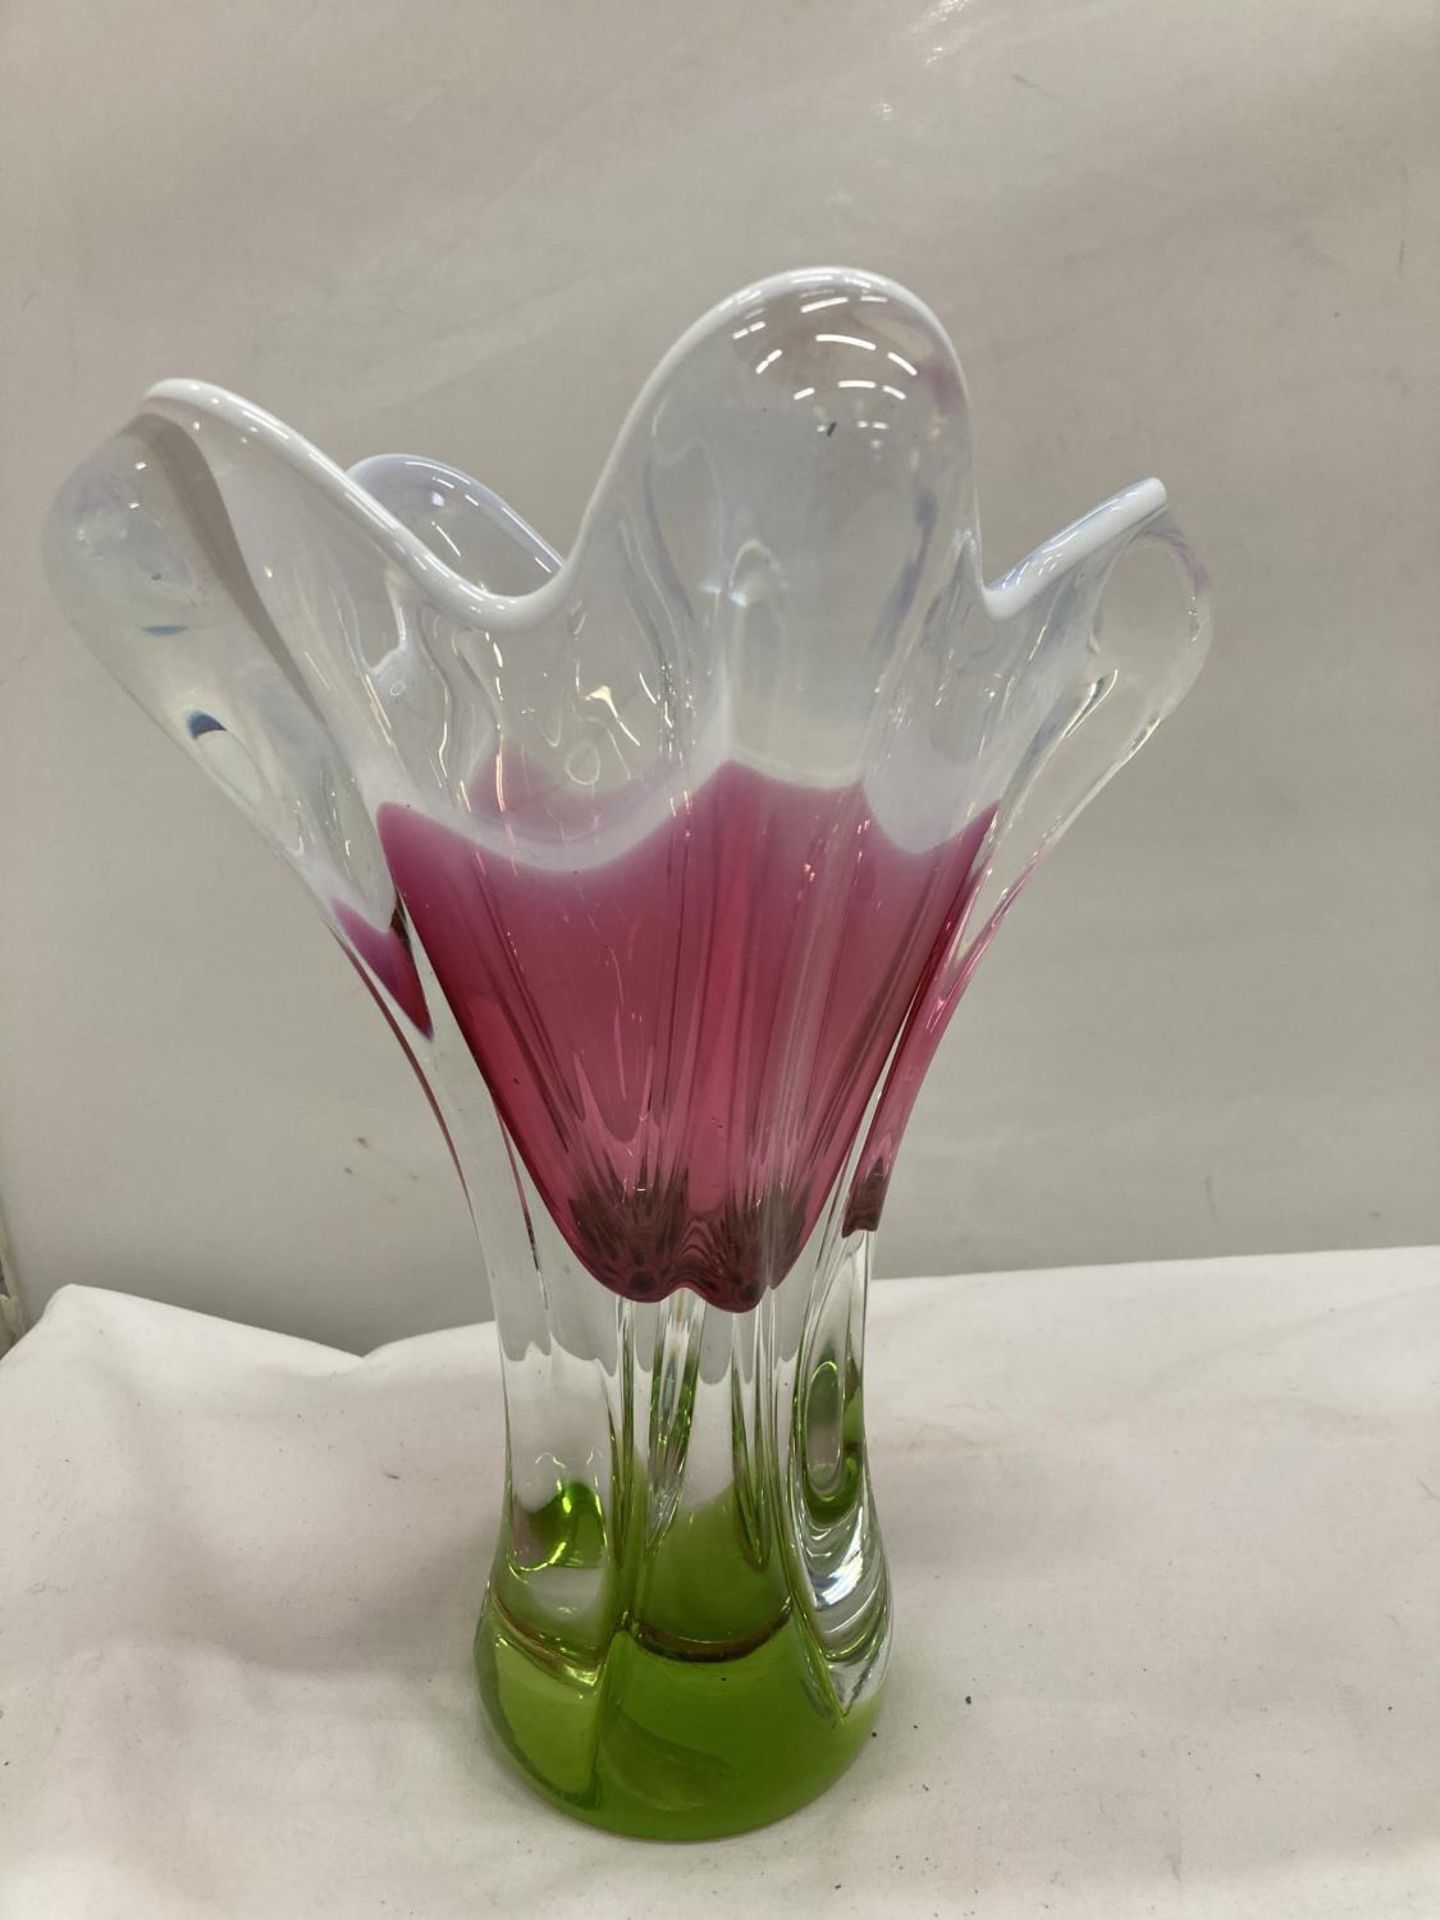 A MURANO STYLE HEAVY ART GLASS VASE WITH GRADUATING COLOURS OF GREEN, CRANBERRY AND ACID WHITE - - Image 11 of 17